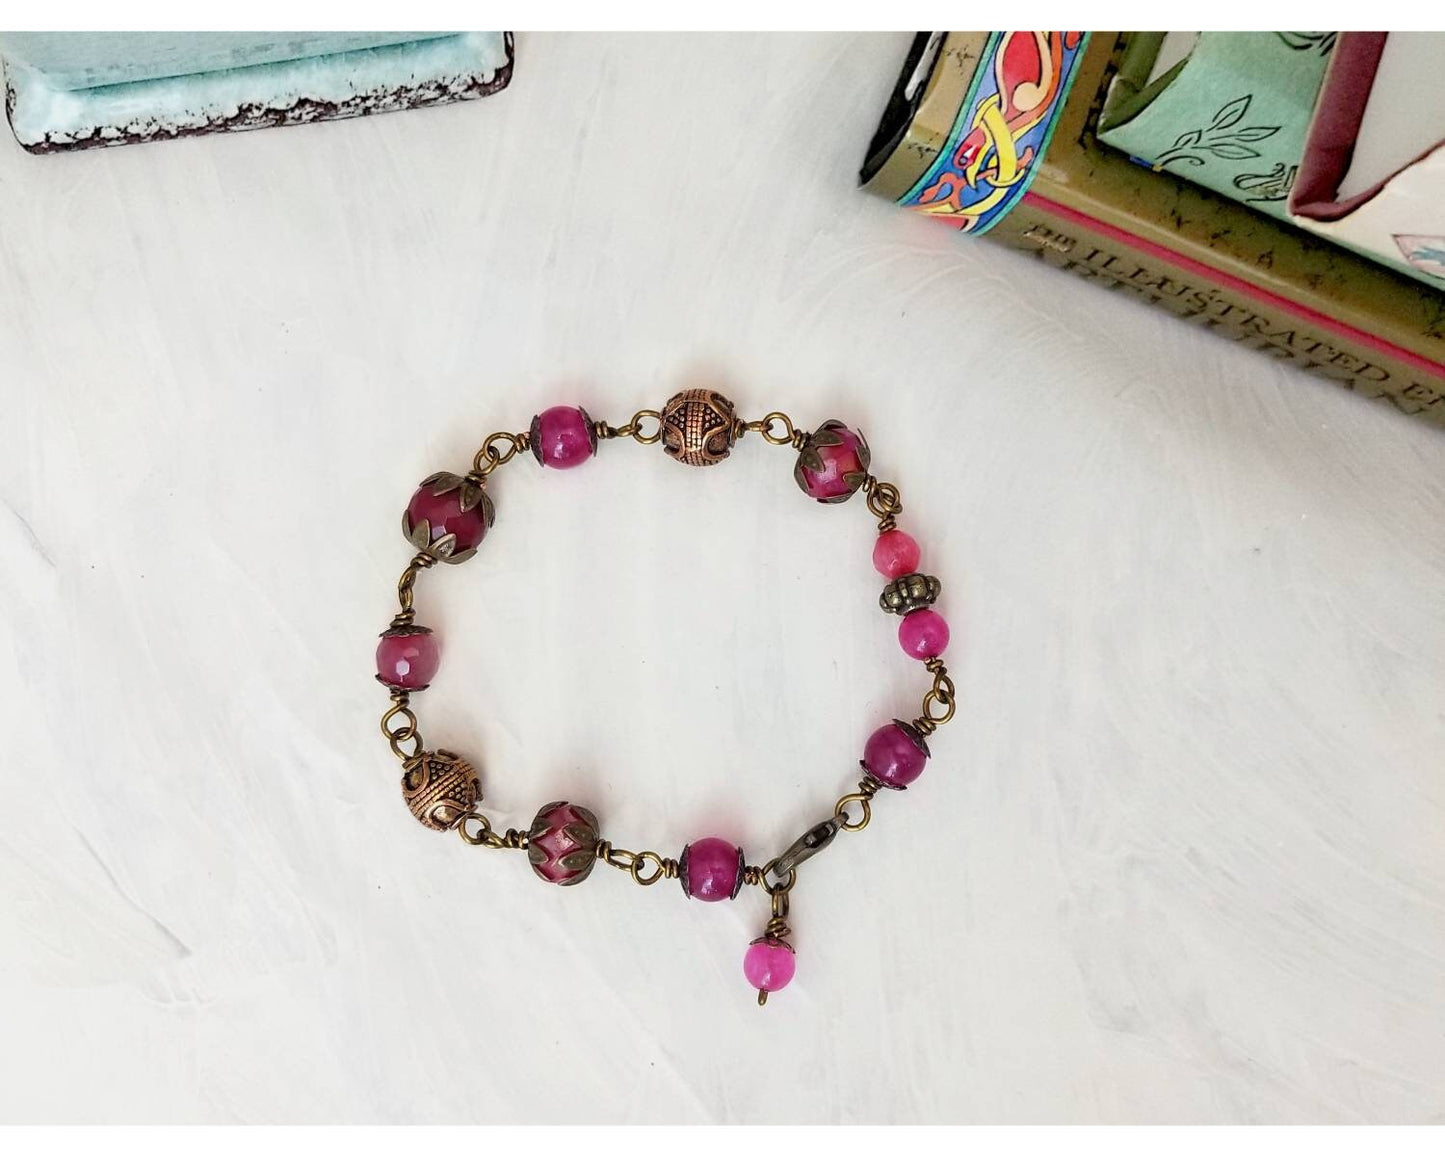 Wire Wrapped Bracelet in Pink, Boho, Bohemian, Gypsy, Renaissance, Medieval, Choice of Colors and Metals